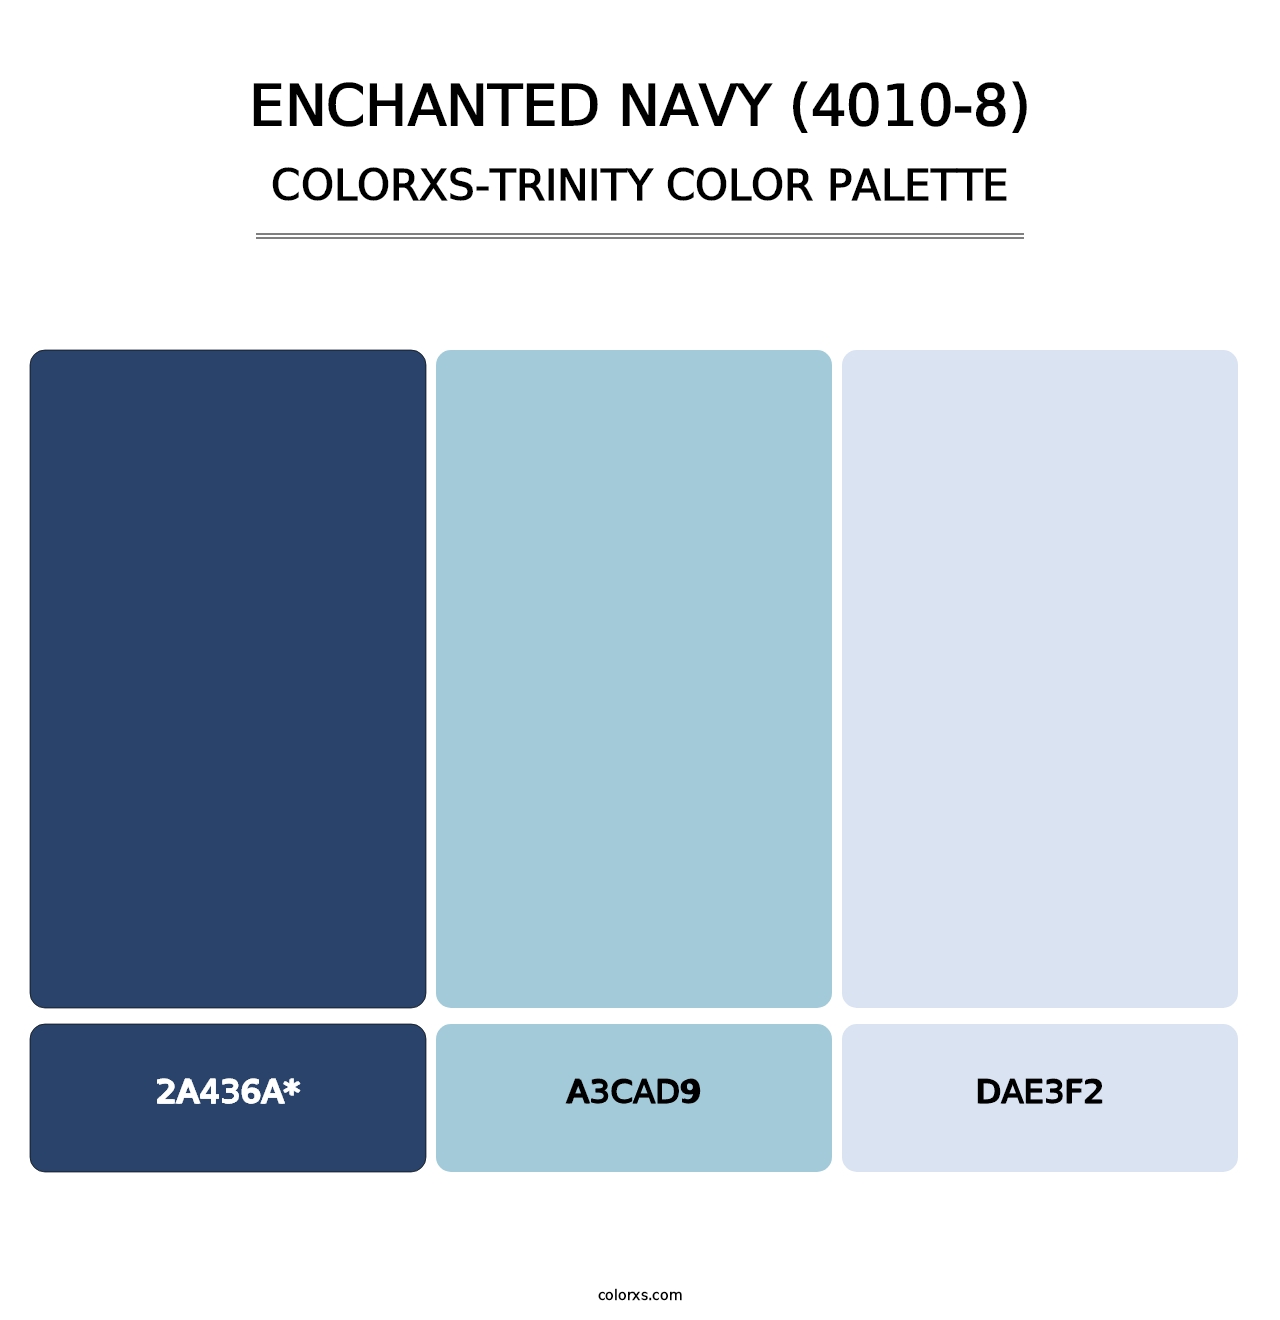 Enchanted Navy (4010-8) - Colorxs Trinity Palette